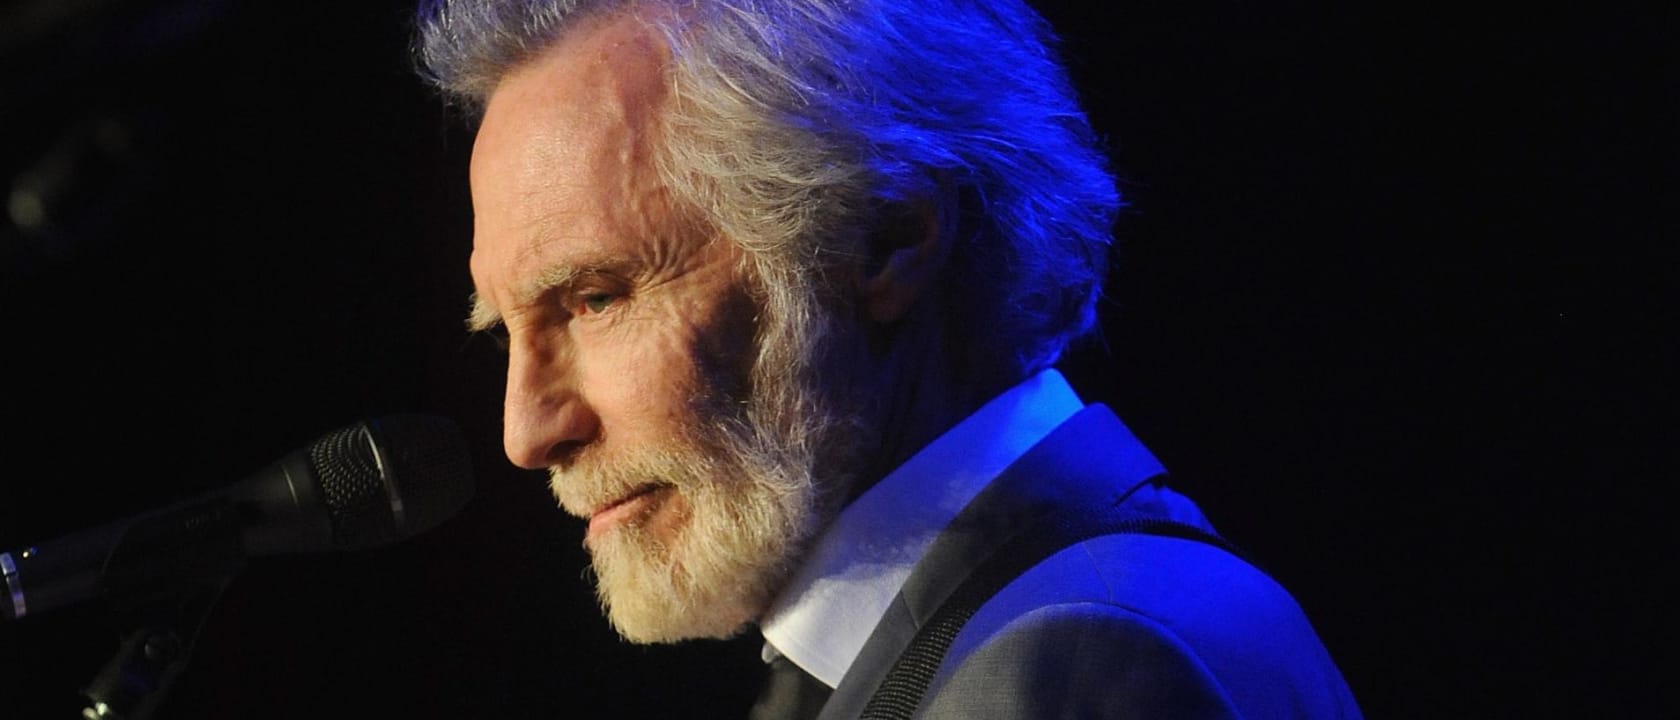 JD Souther